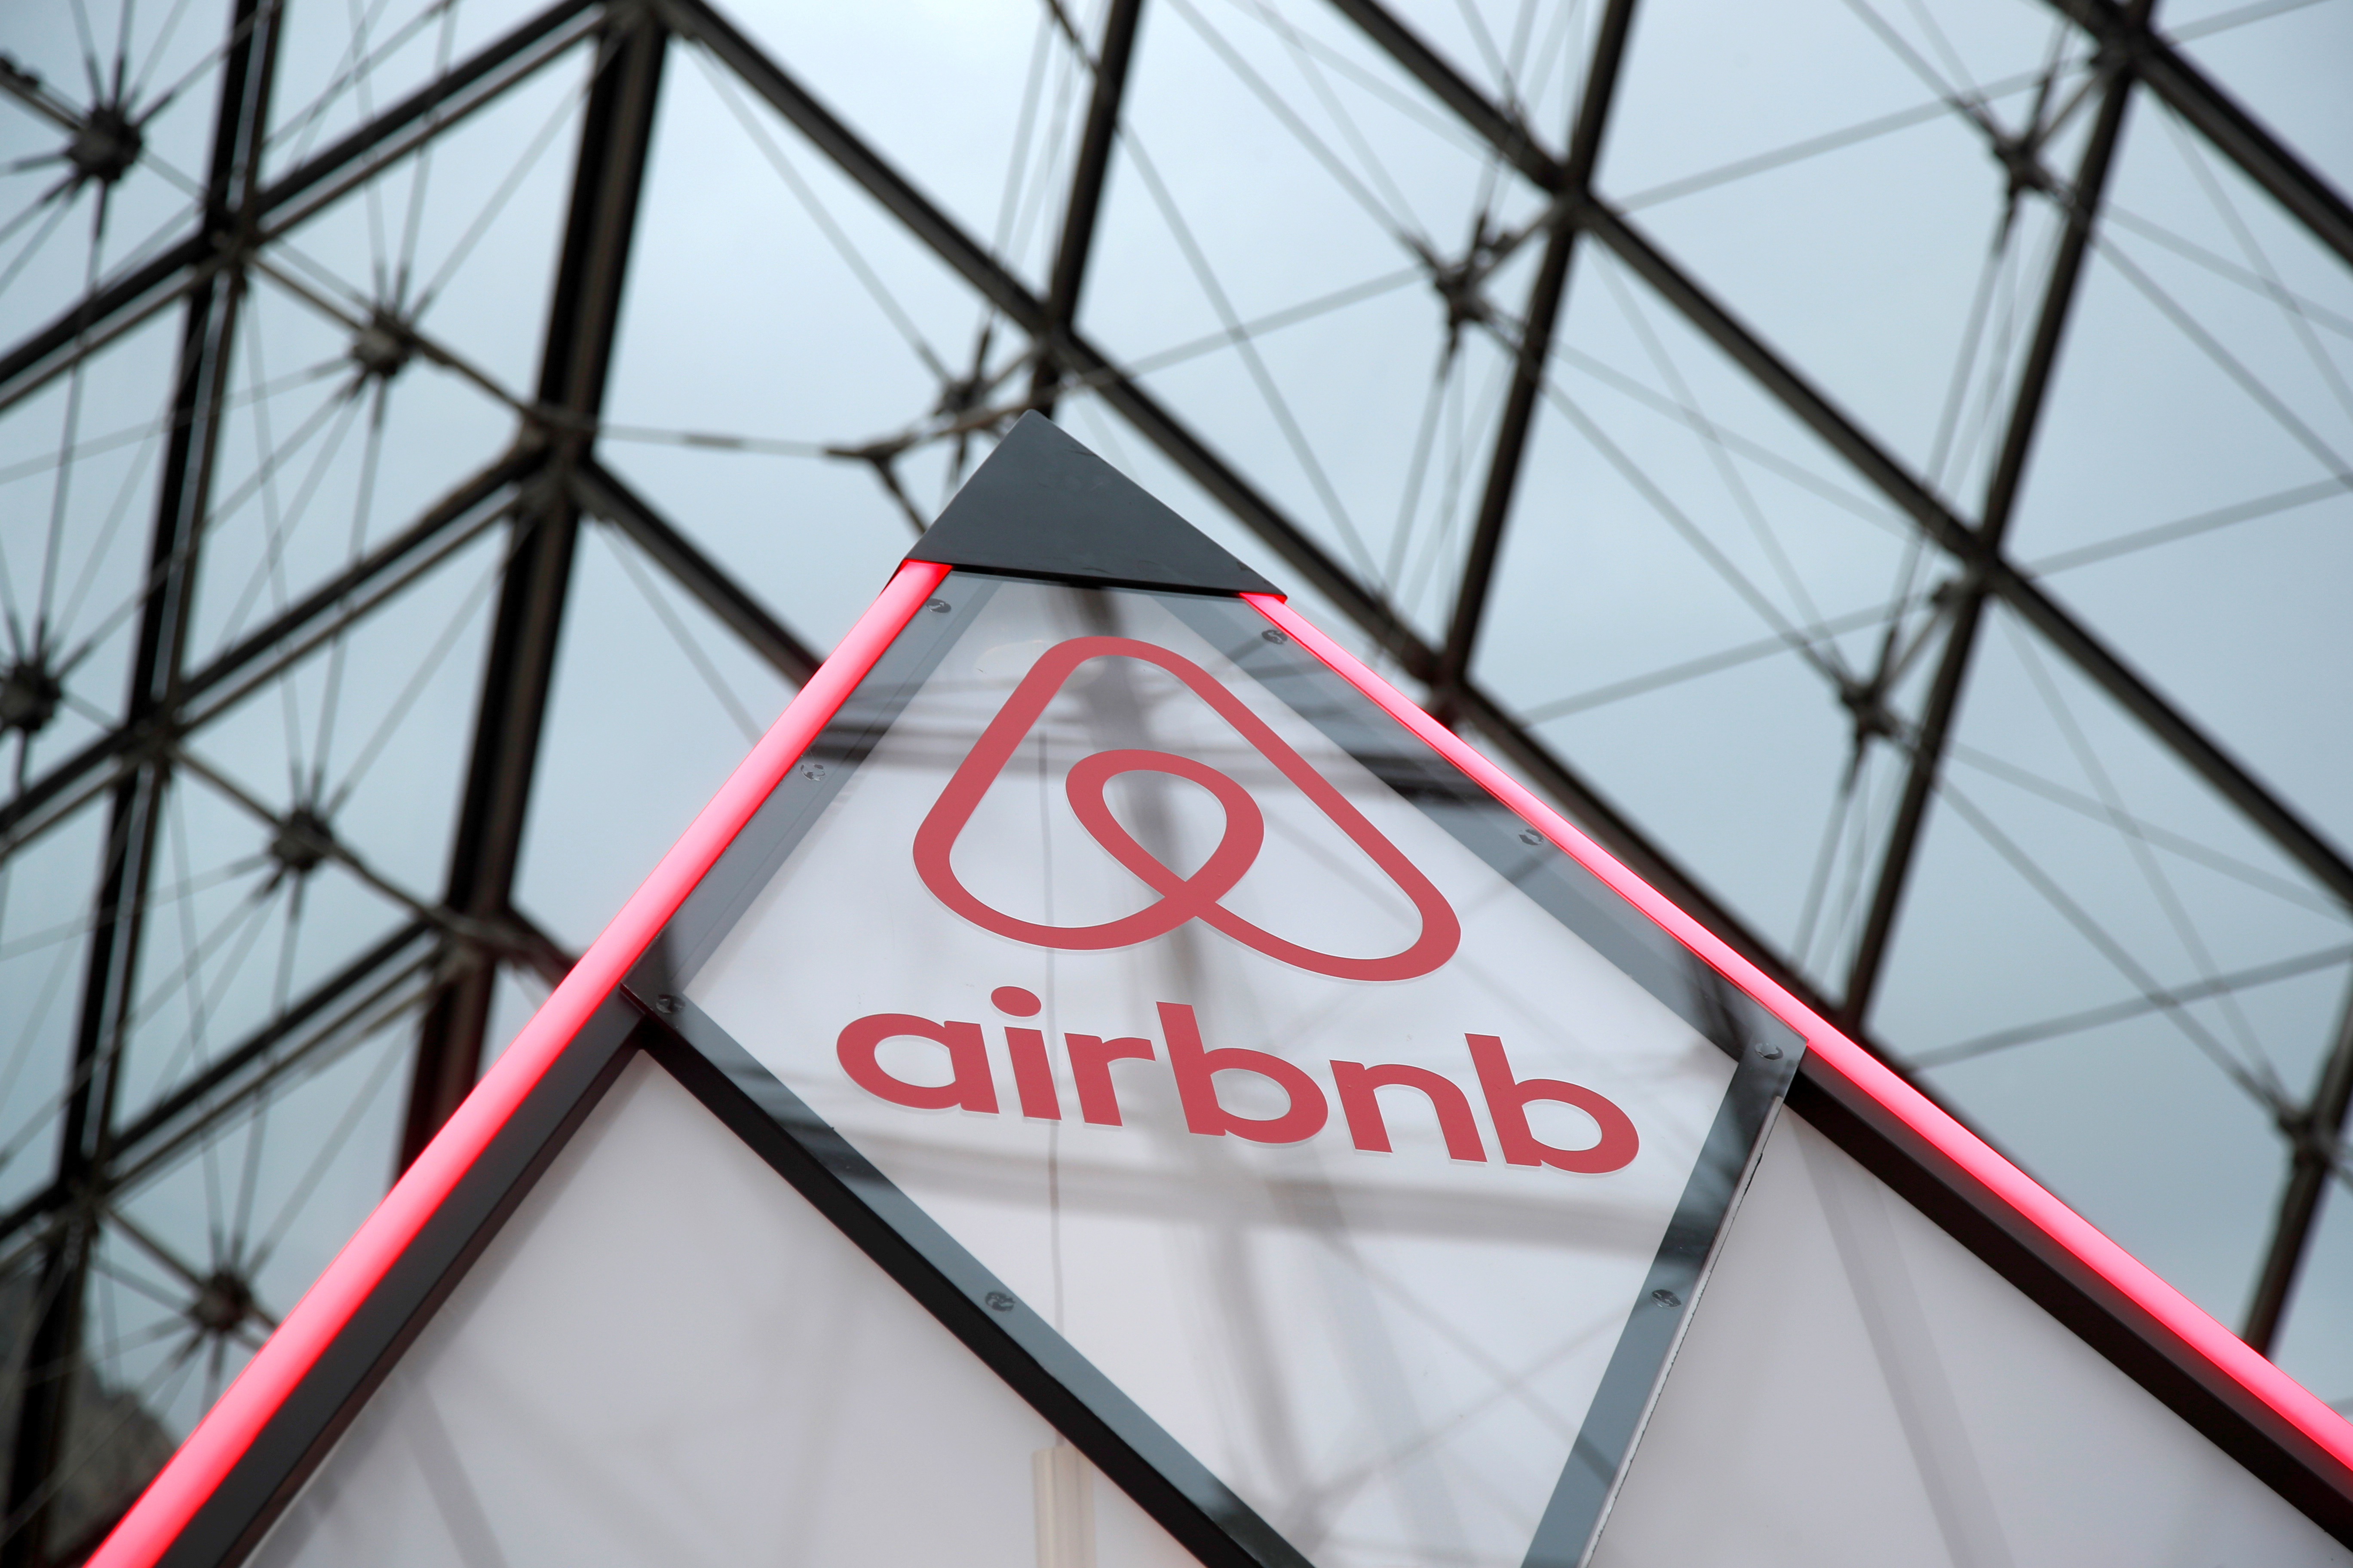 Airbnb logo is seen on a little mini pyramid under the glass Pyramid of the Louvre museum in Paris